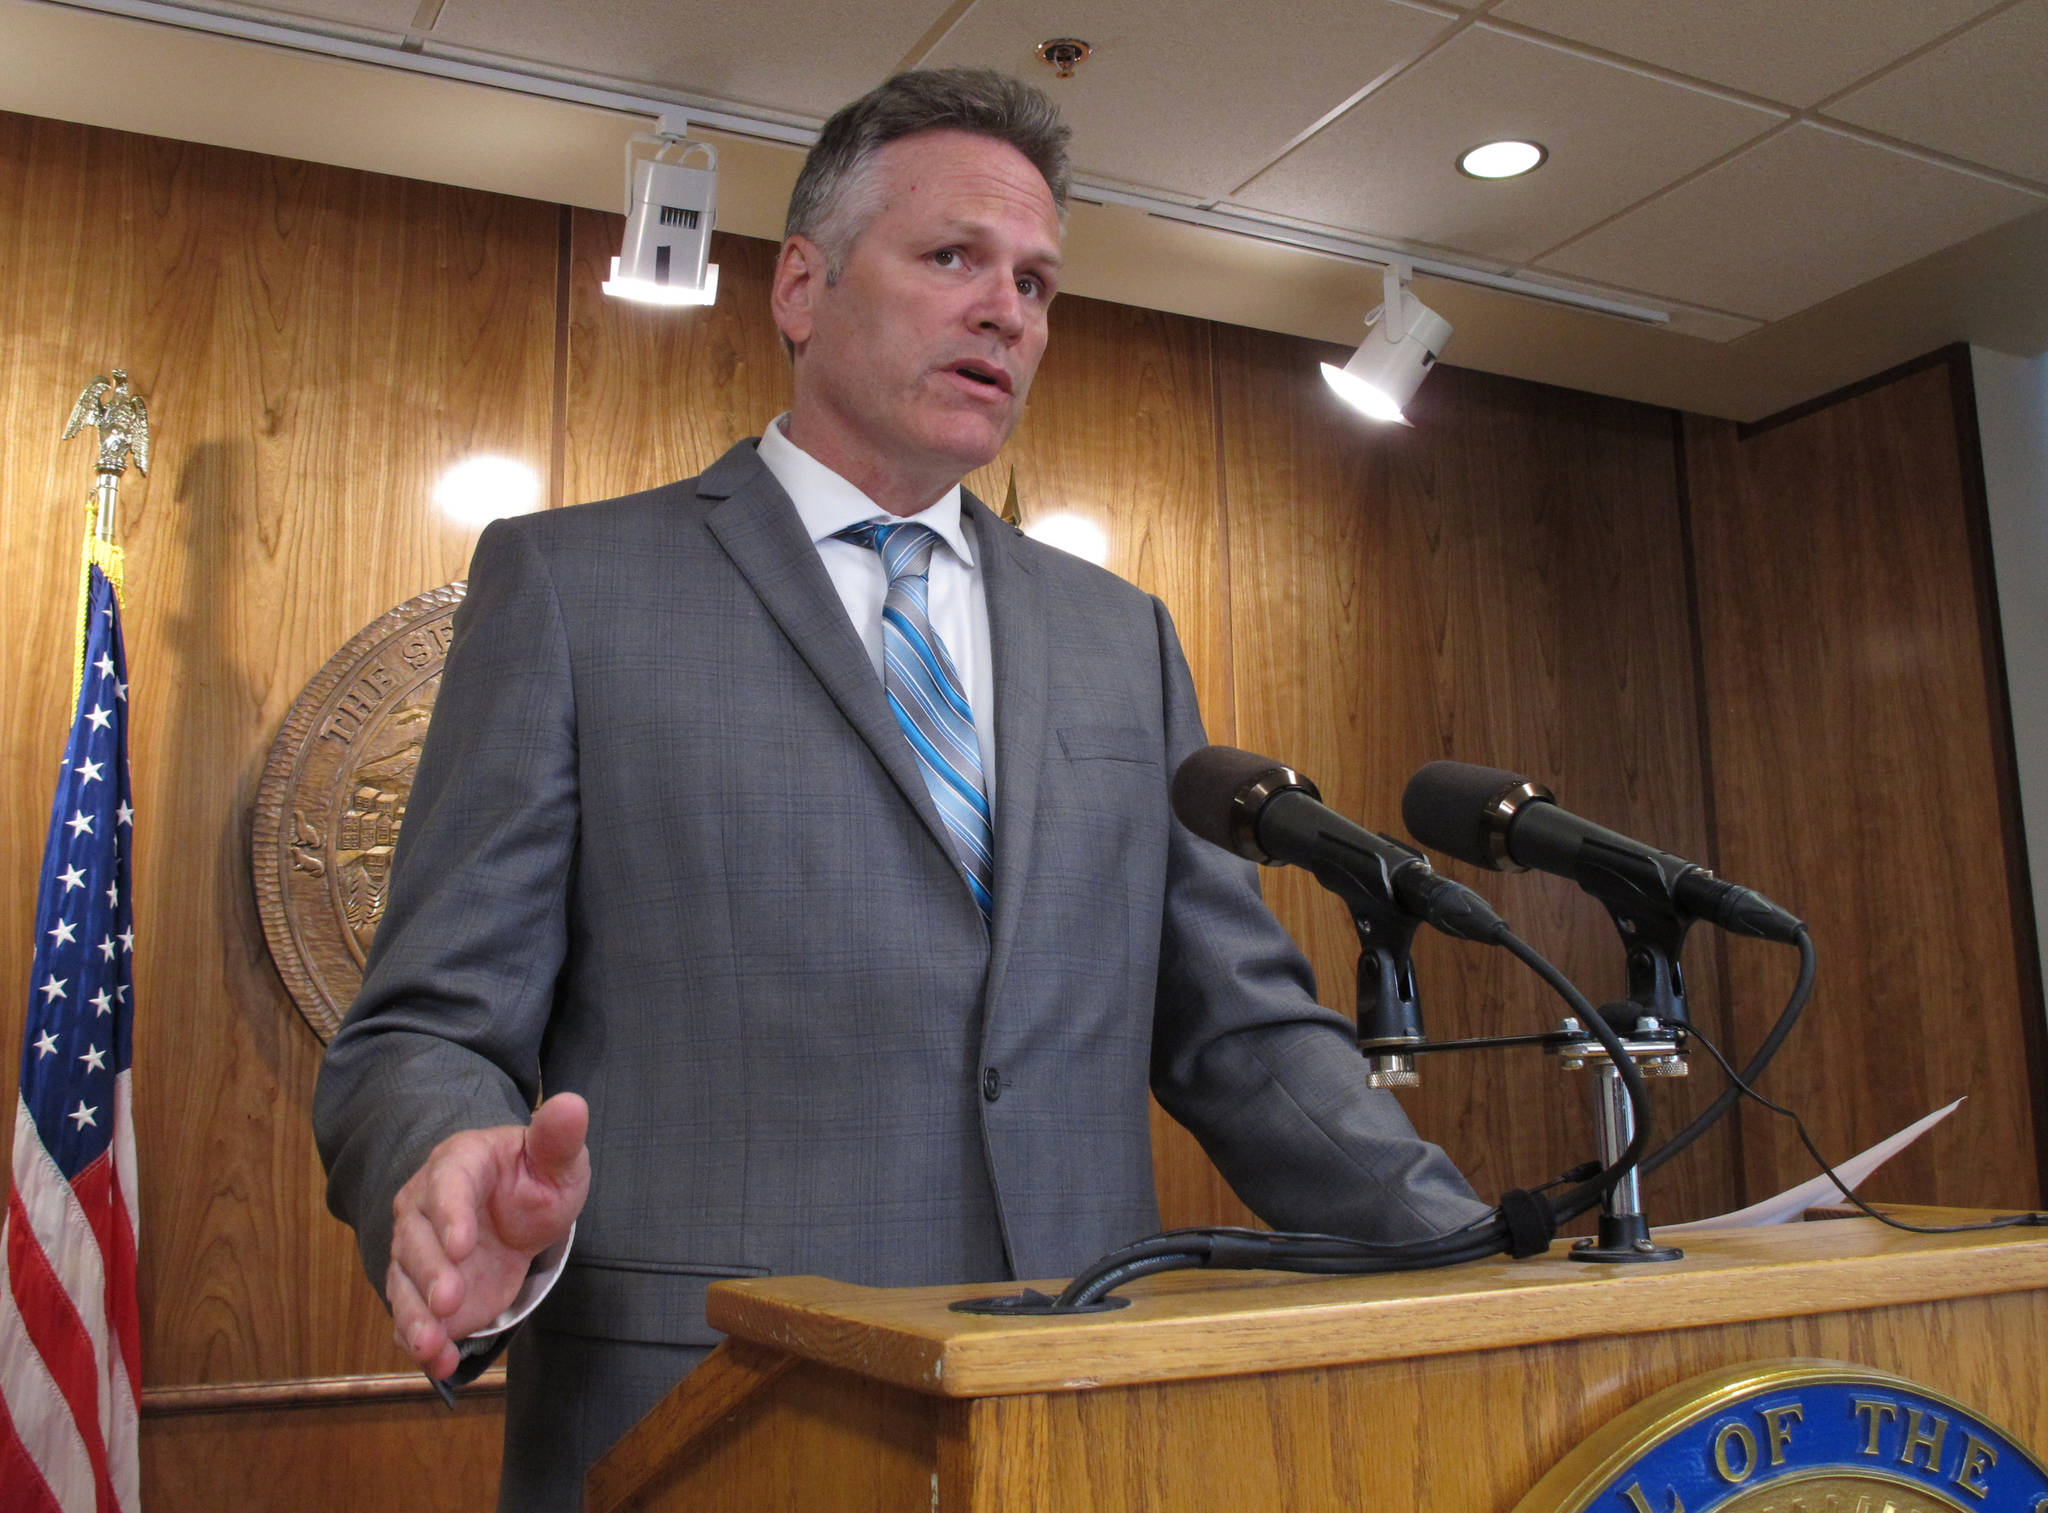 Gov. Mike Dunleavy speaks to reporters about his budget vetoes at the state Capitol in Juneau on Friday. (AP Photo/Becky Bohrer)